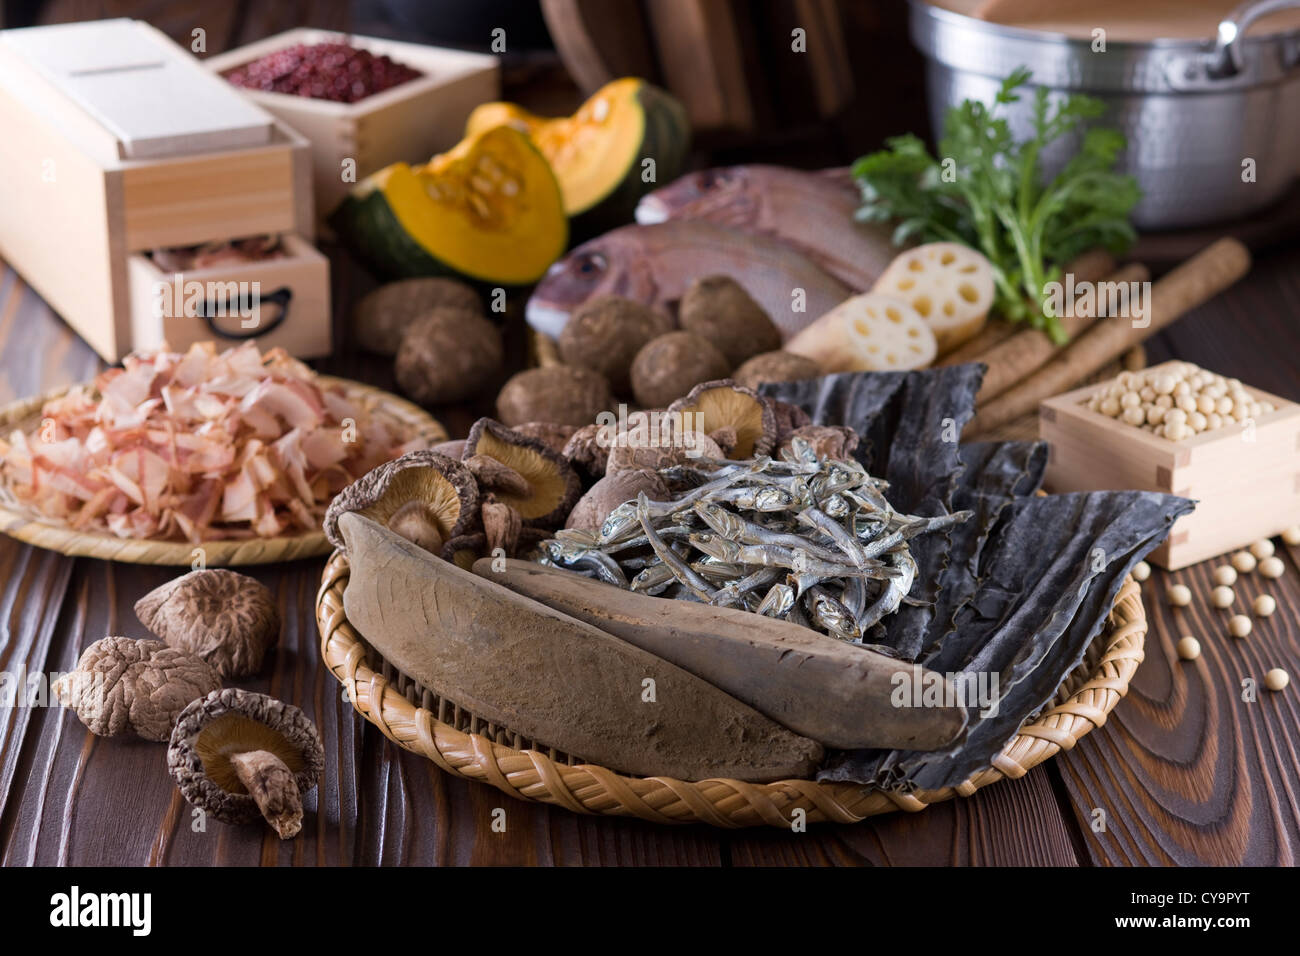 Ingredients of Traditional Japanese Food Stock Photo